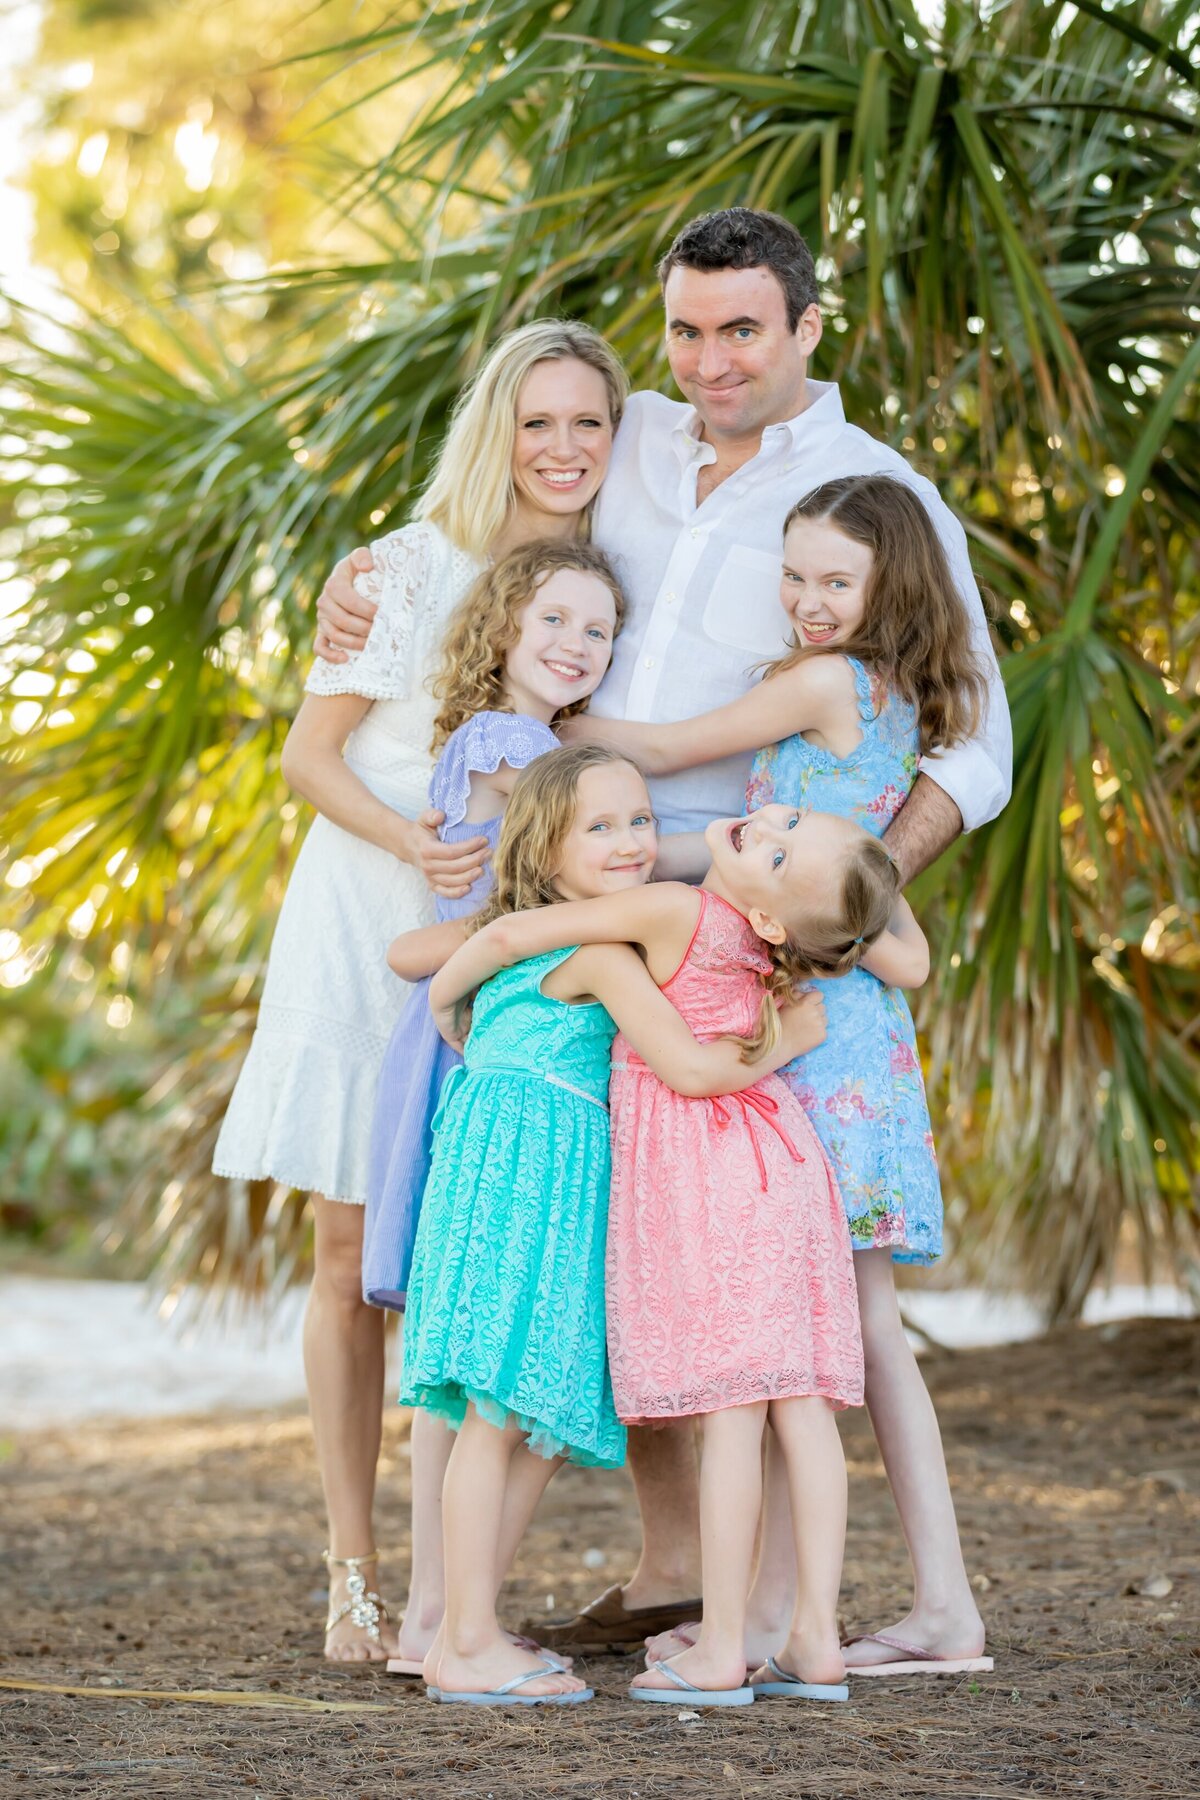 Adorable family with four young daughters hugging mom and dad